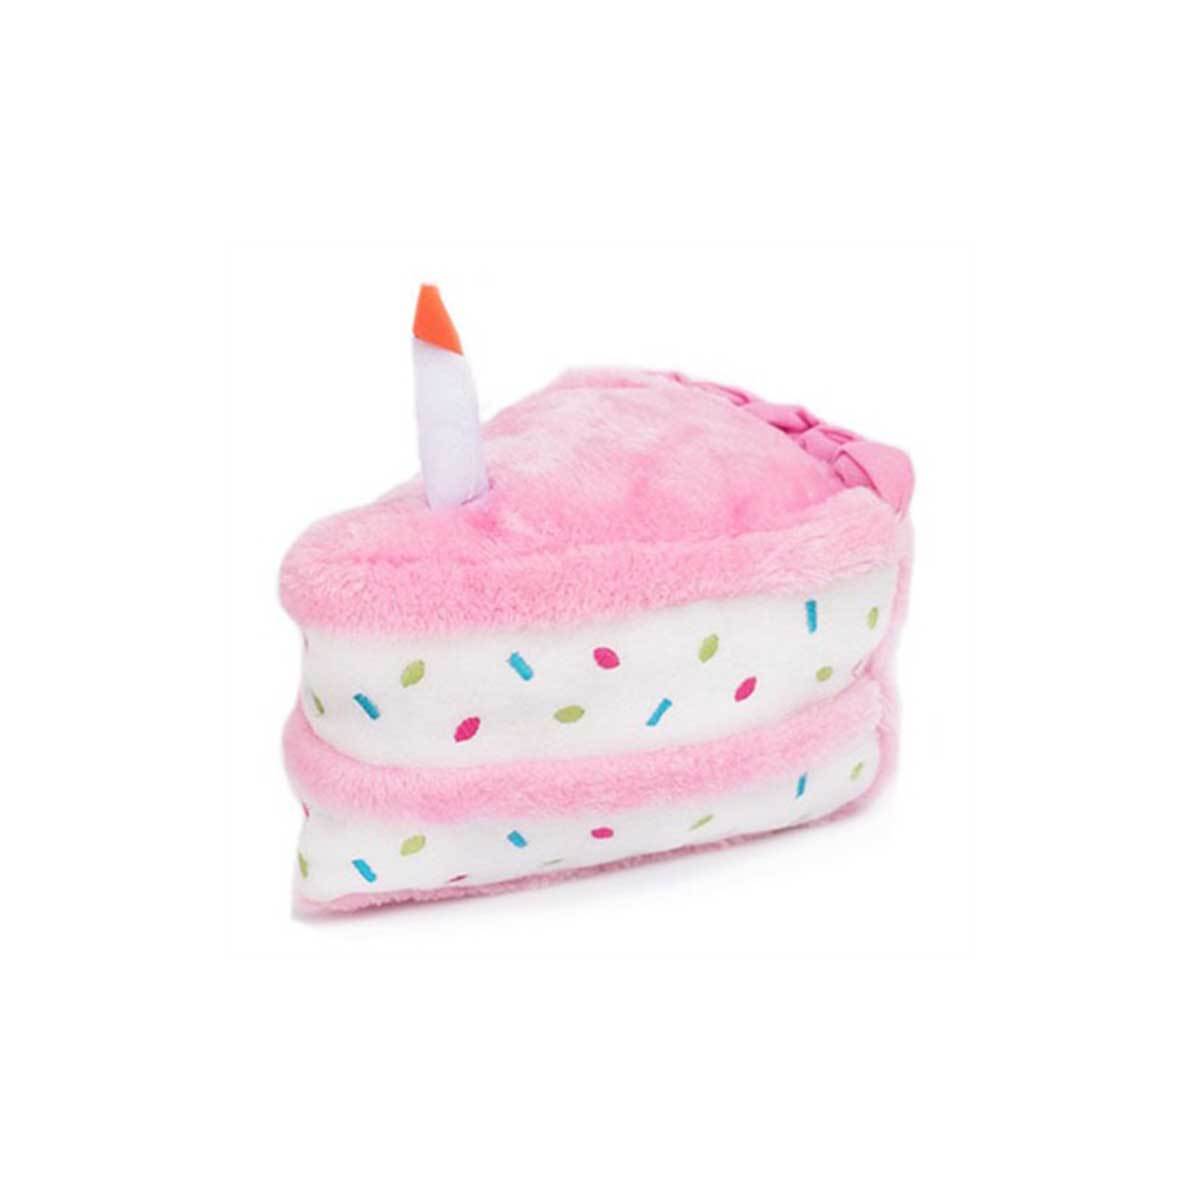 Birthday Cake Dog Toy in Pink | Pawlicious & Company